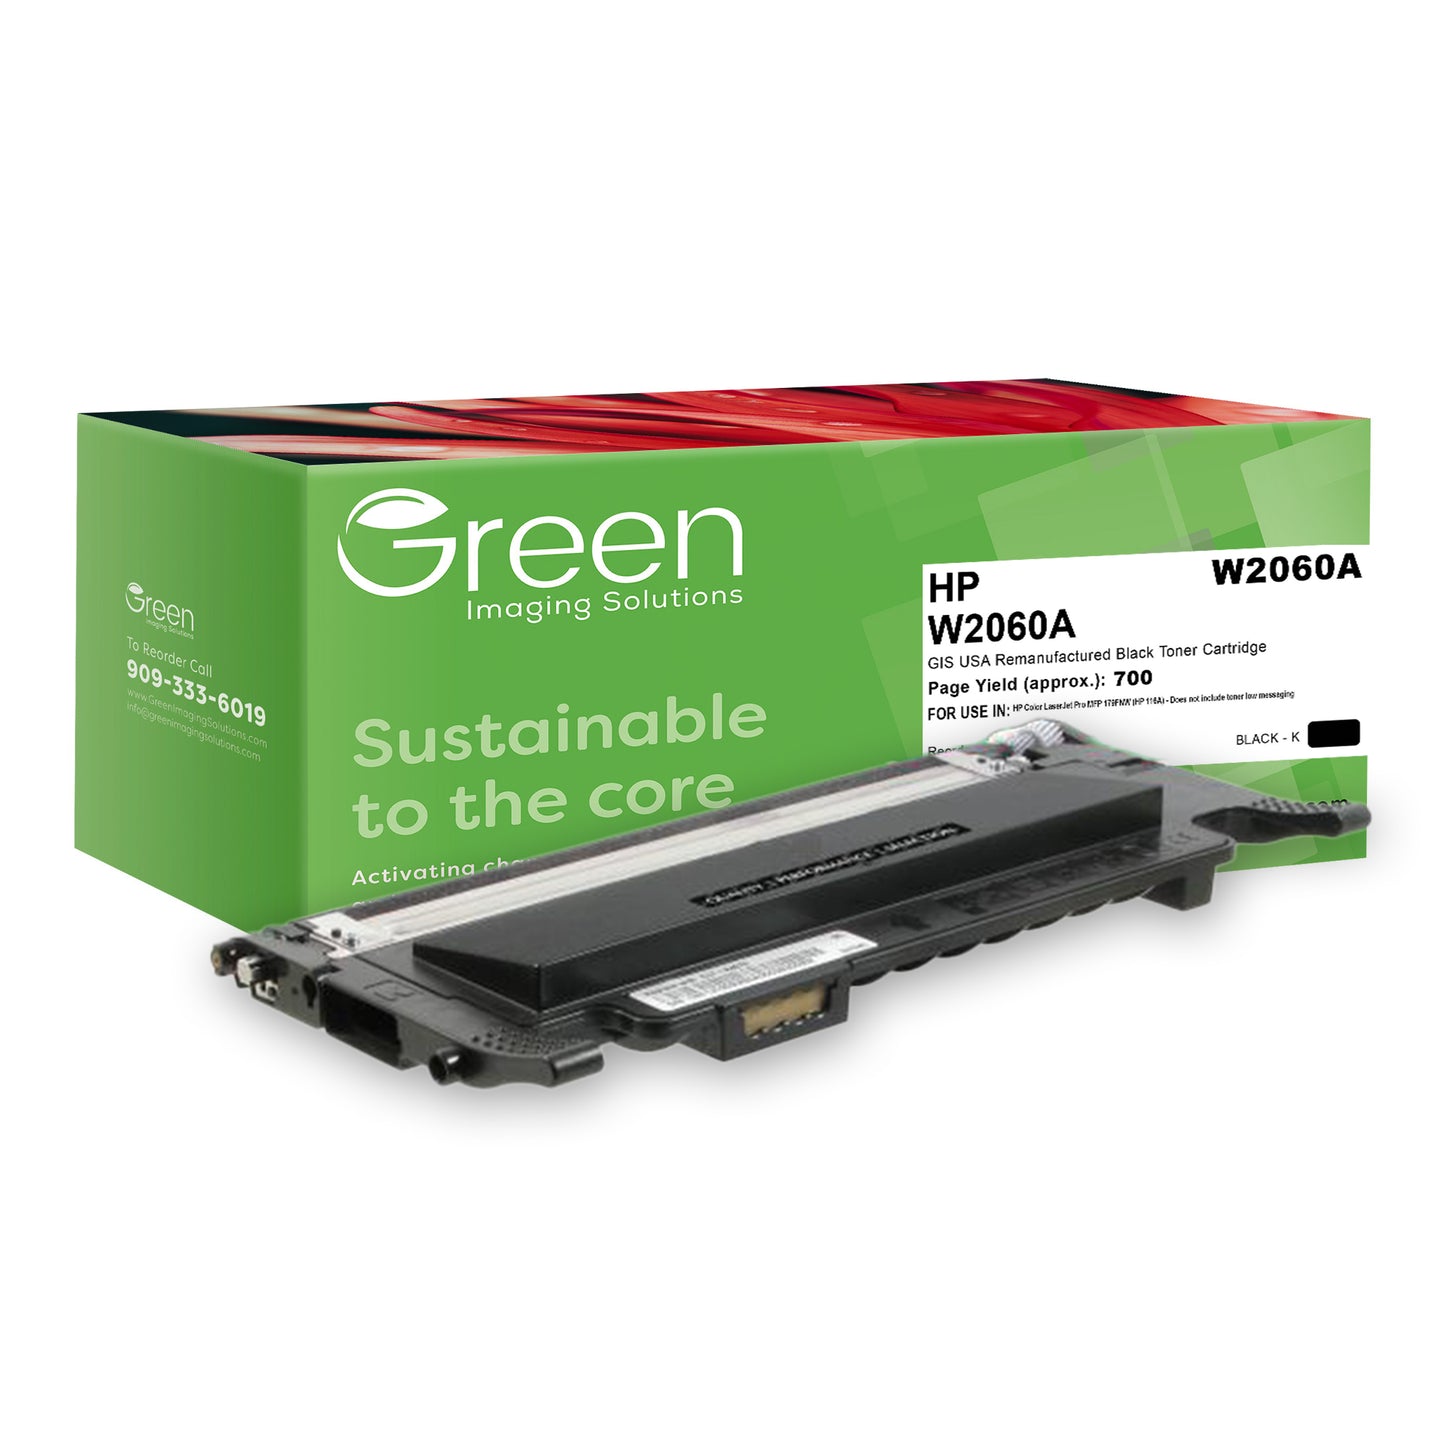 Green Imaging Solutions USA Remanufactured Black Toner Cartridge (Reused OEM Chip) for HP 116A (HP W2060A)